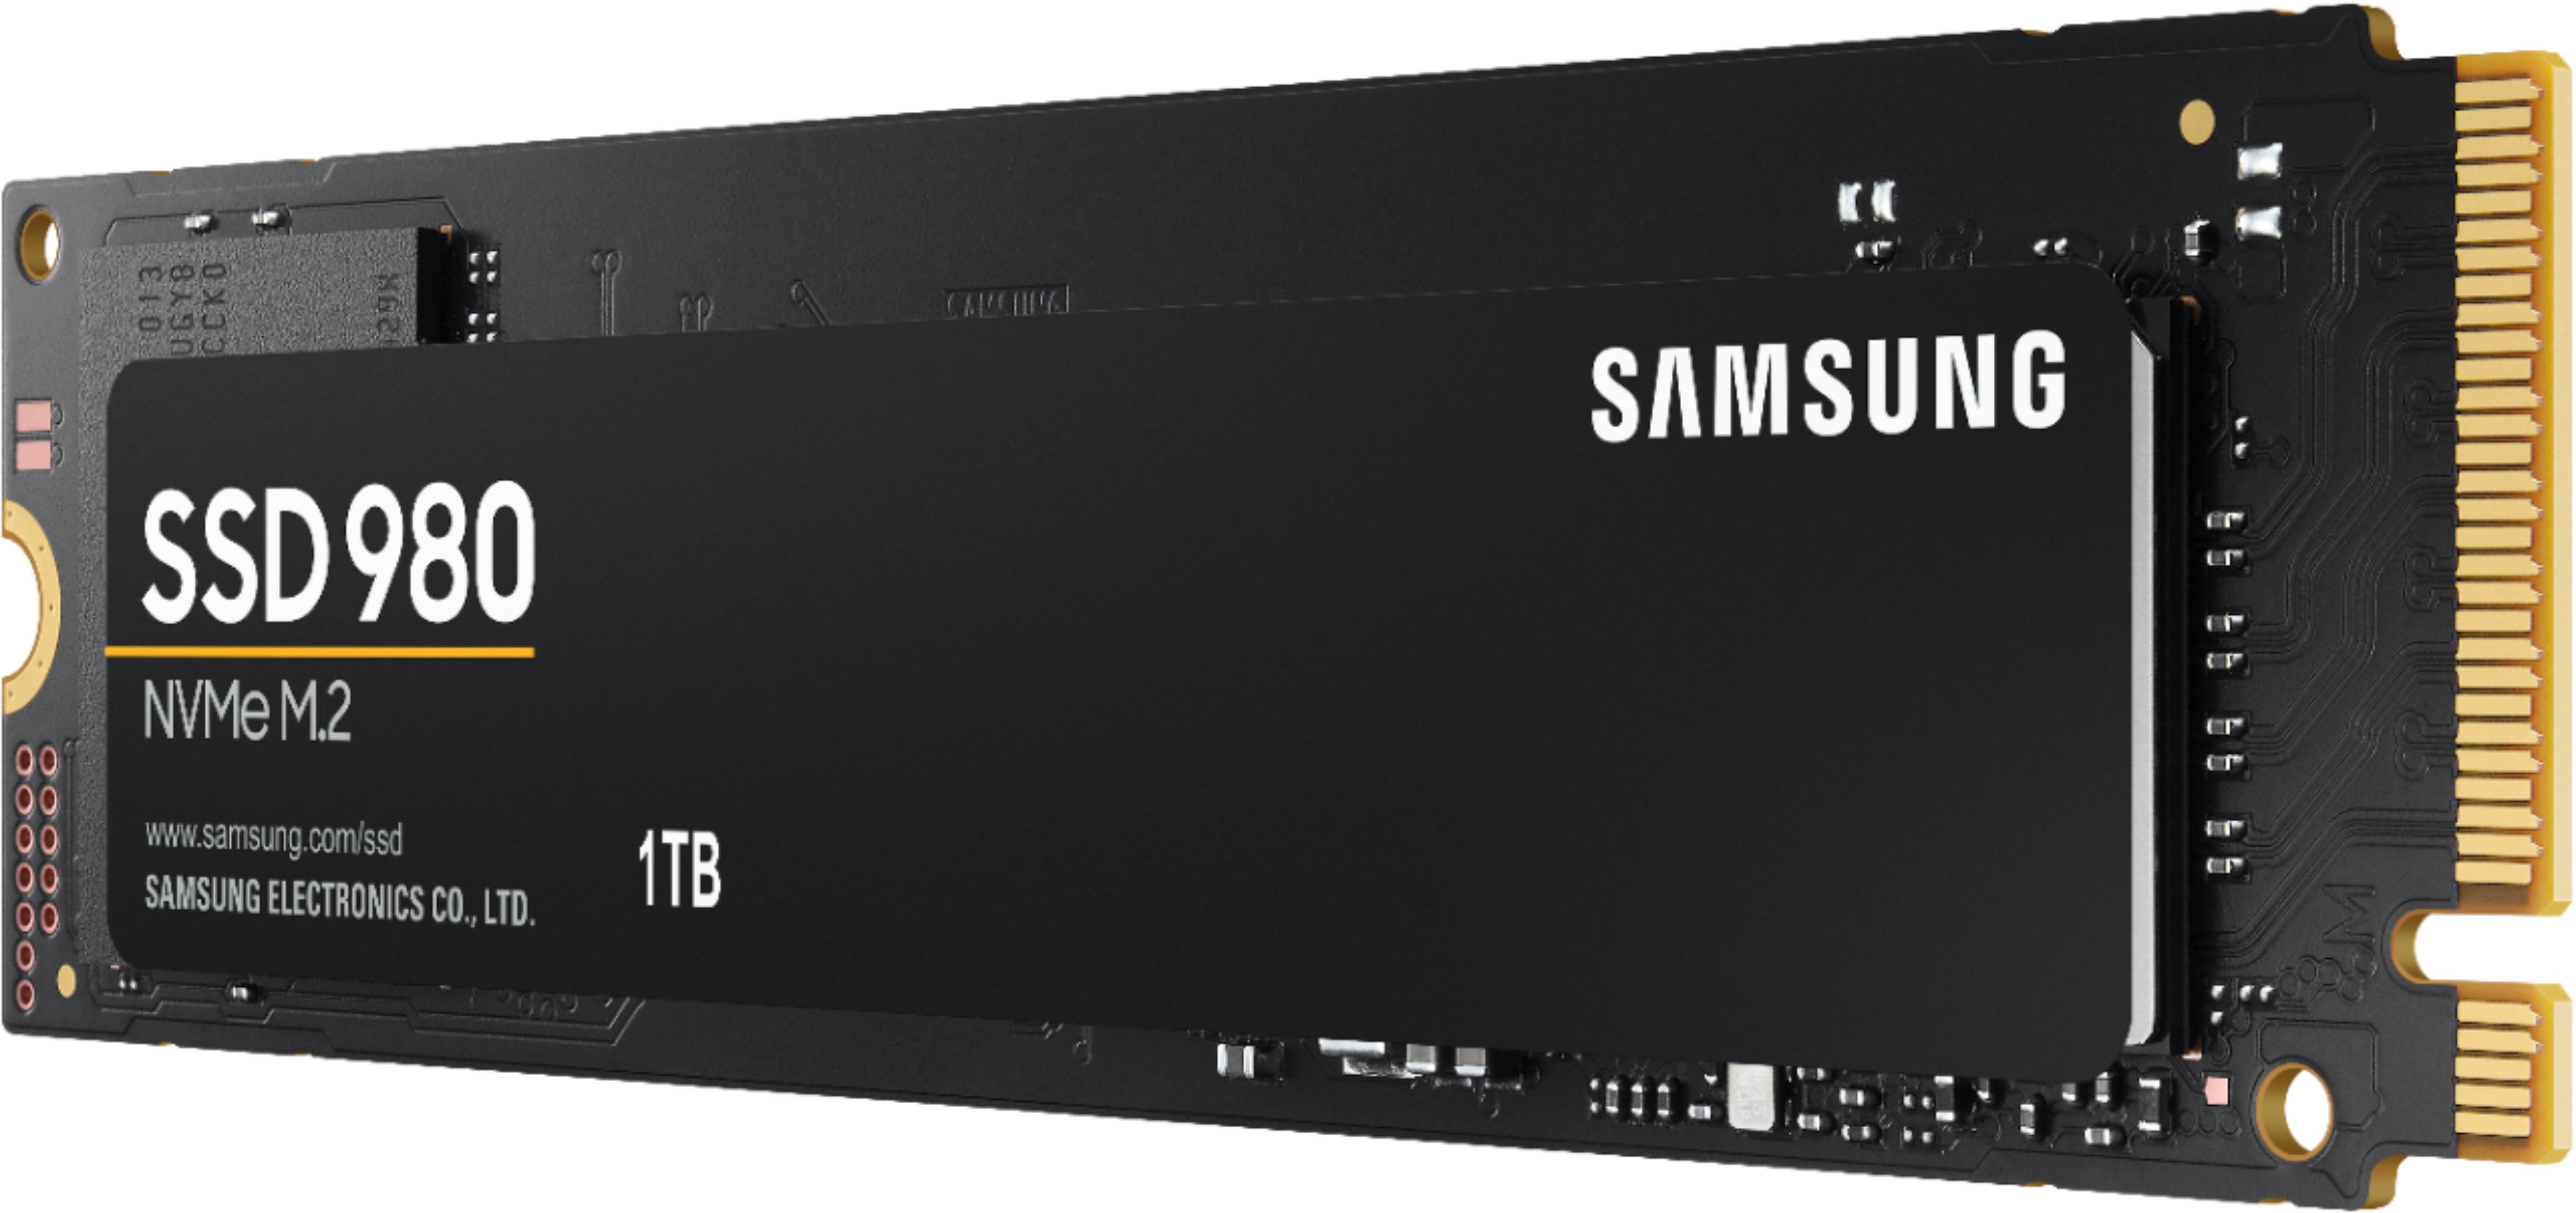 Samsung - 980 1TB PCIe Gen 3 x4 NVMe Gaming Internal Solid State Drive